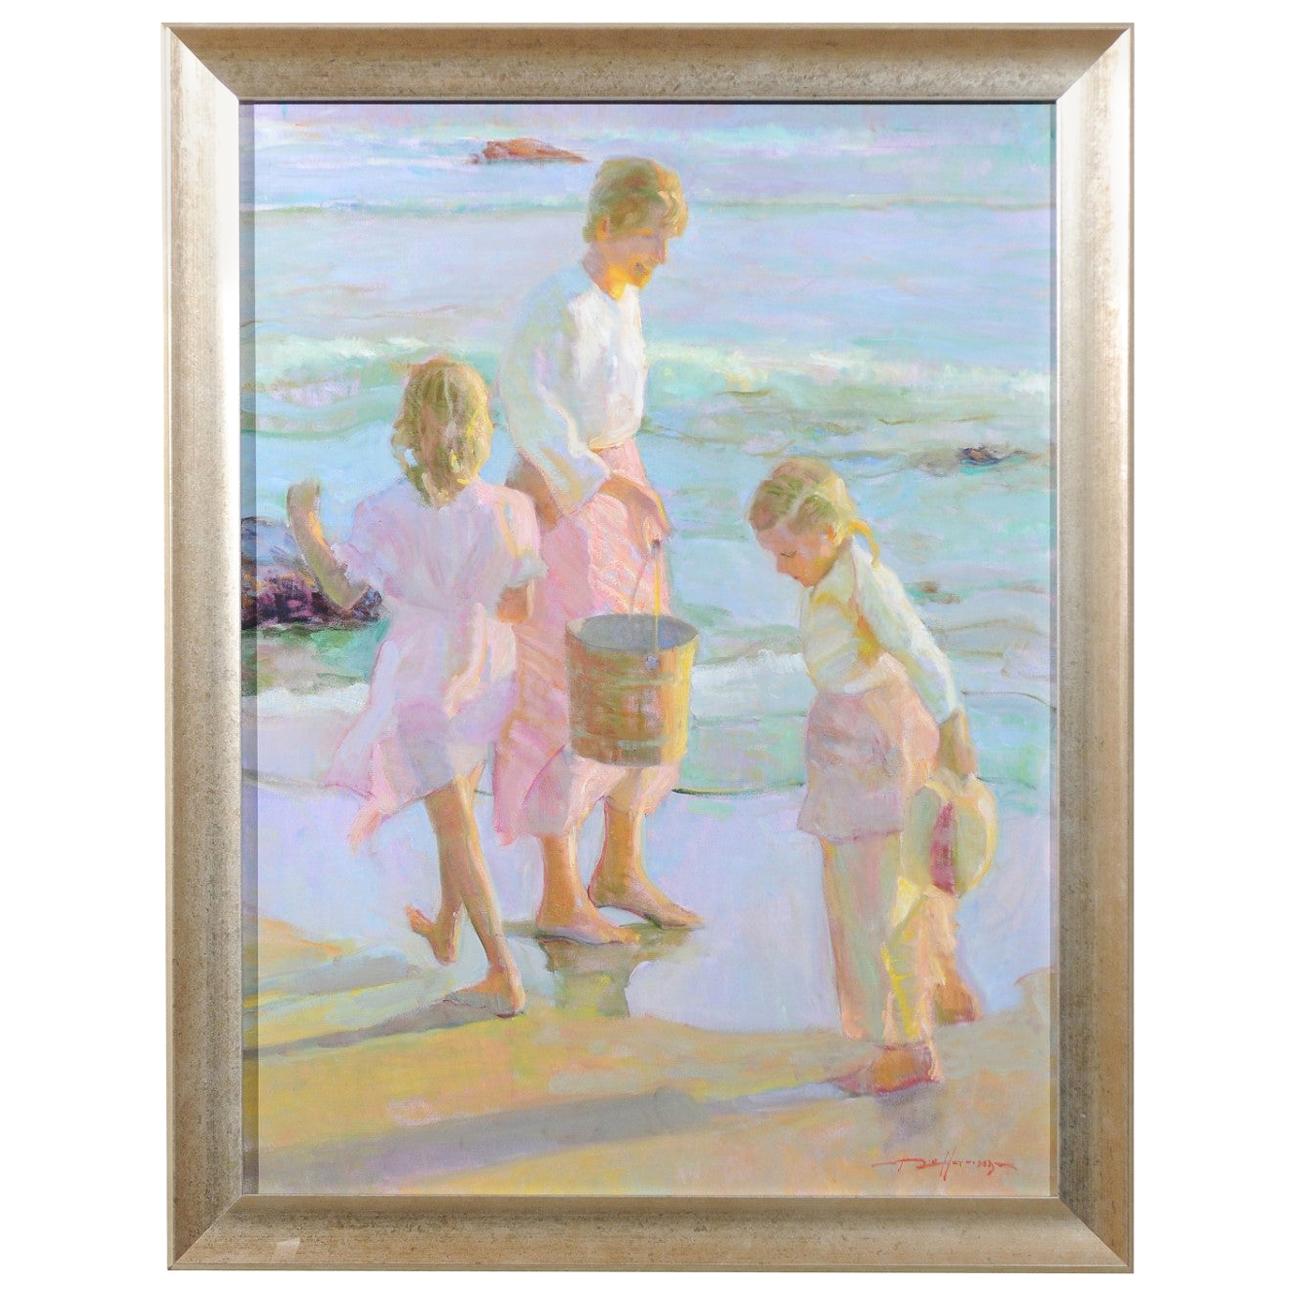 Daughters by Don Hatfield, Vertical Contemporary Framed Beach Scene Painting